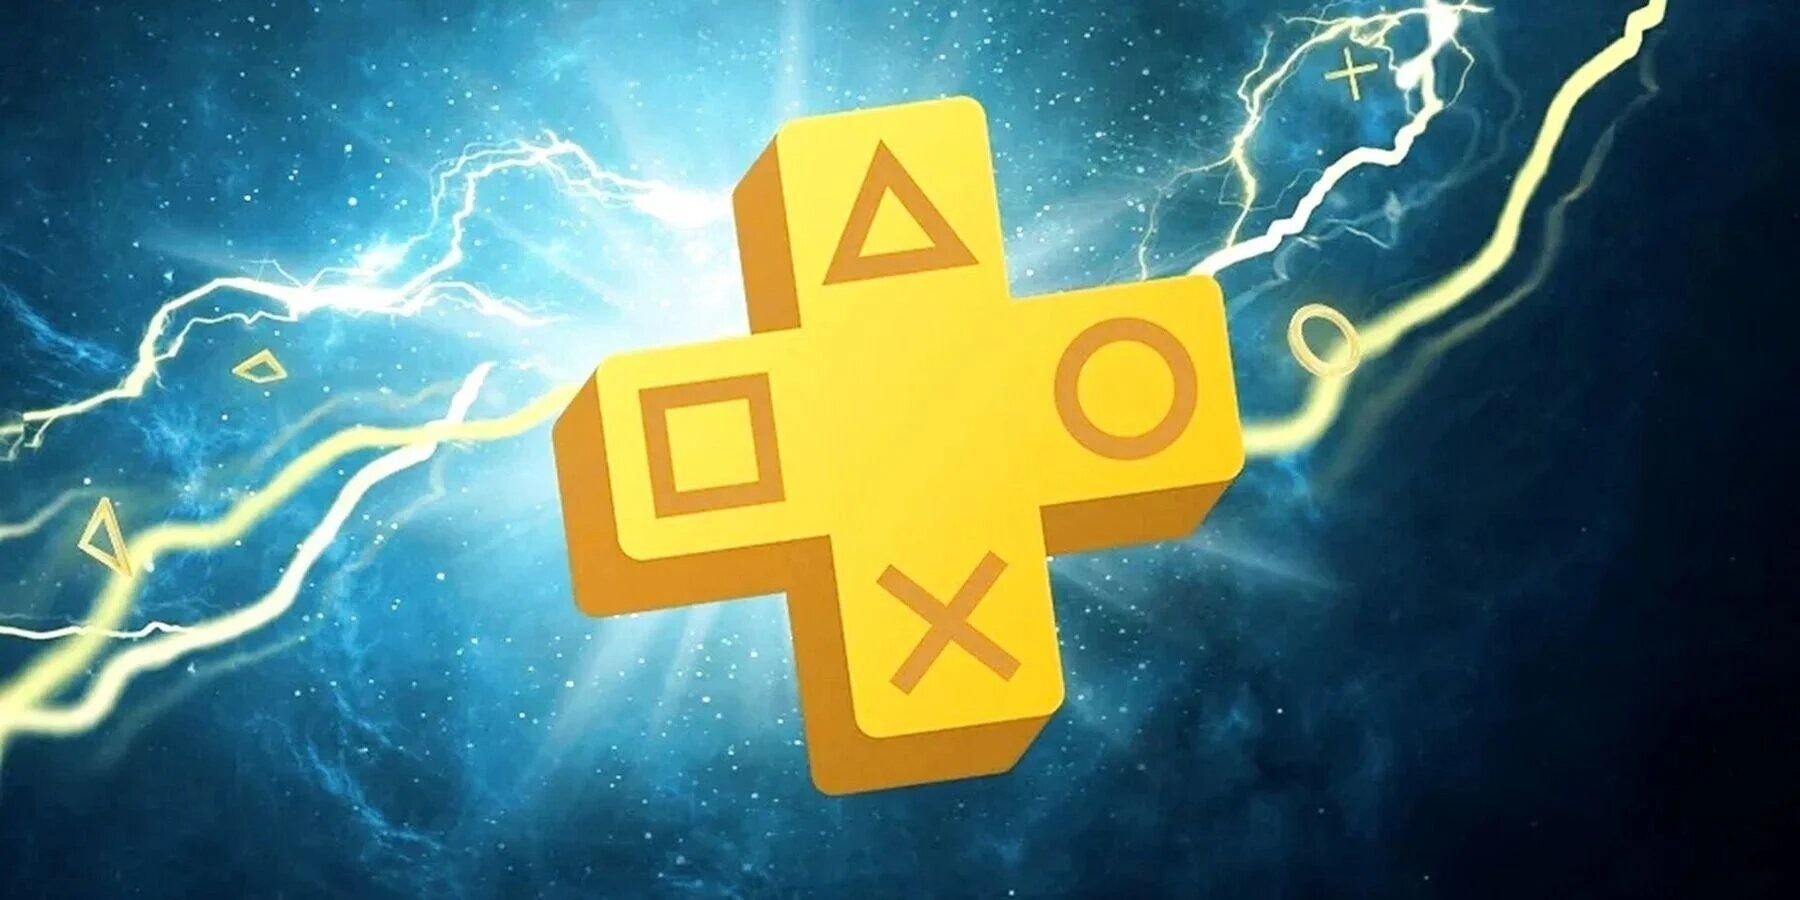 PS Plus Extra Games July 2023: A Complete List - News